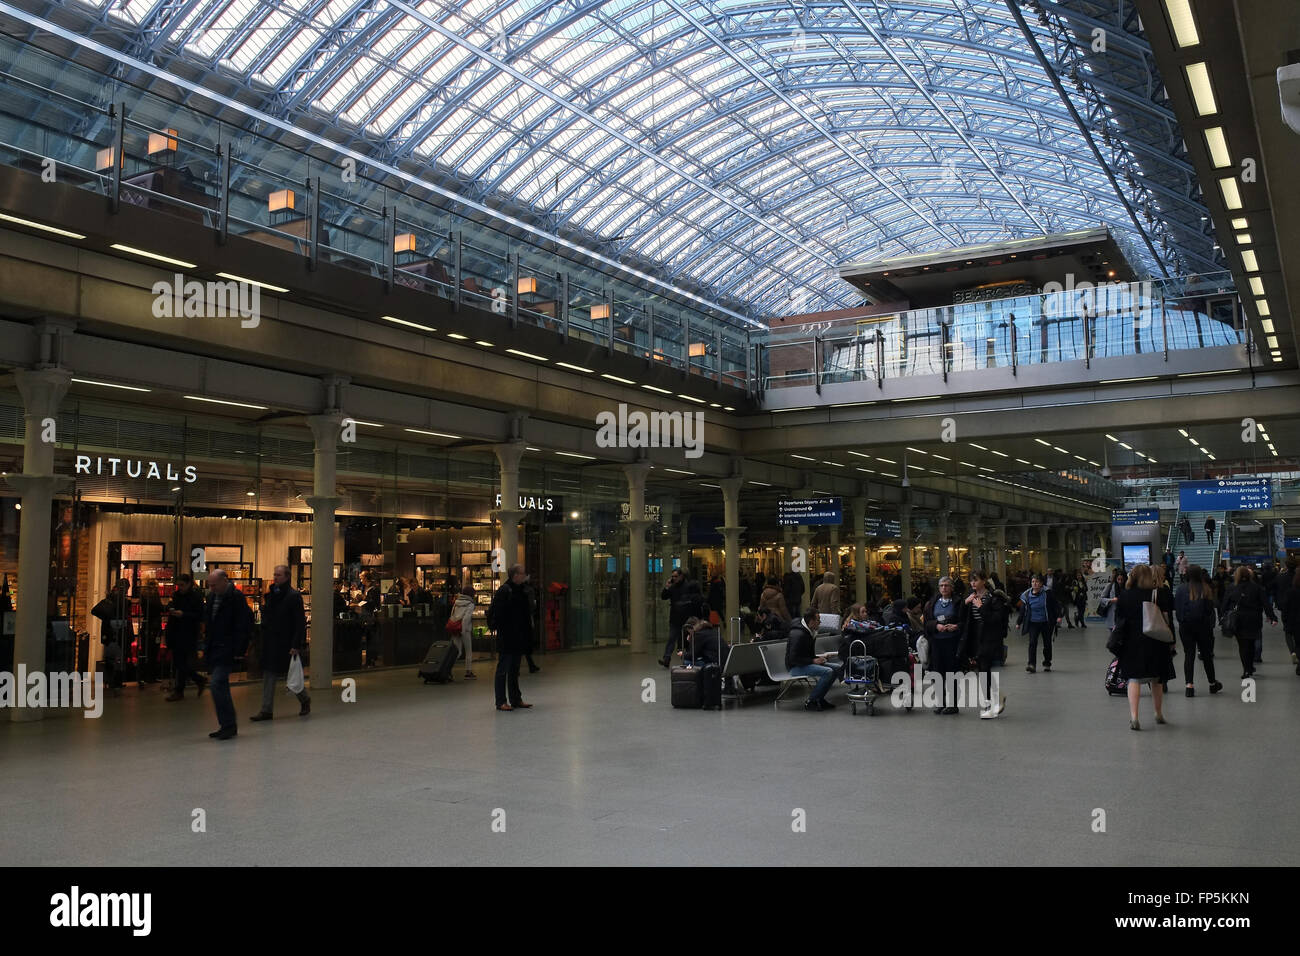 The shopping and departures & arrivals concourse at St. Pancras International Railway Station, in London, England, UK, Europe. Stock Photo